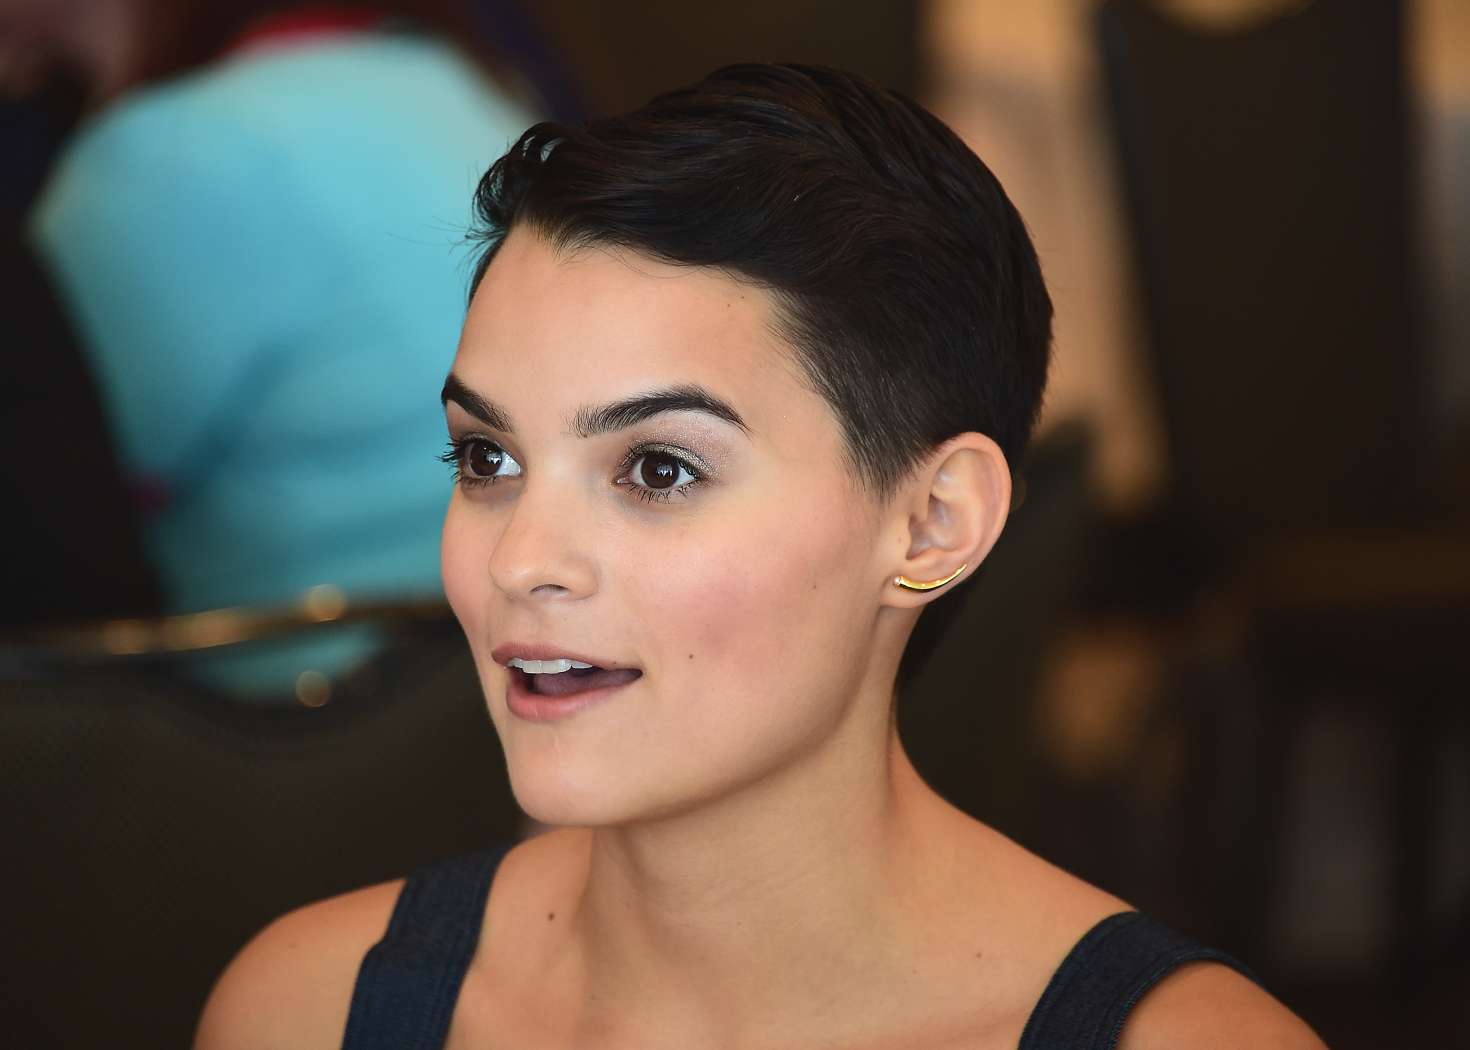 Brianna Hildebrand - The Exorcist Photocall at 2017 Comic-Con in San Diego....